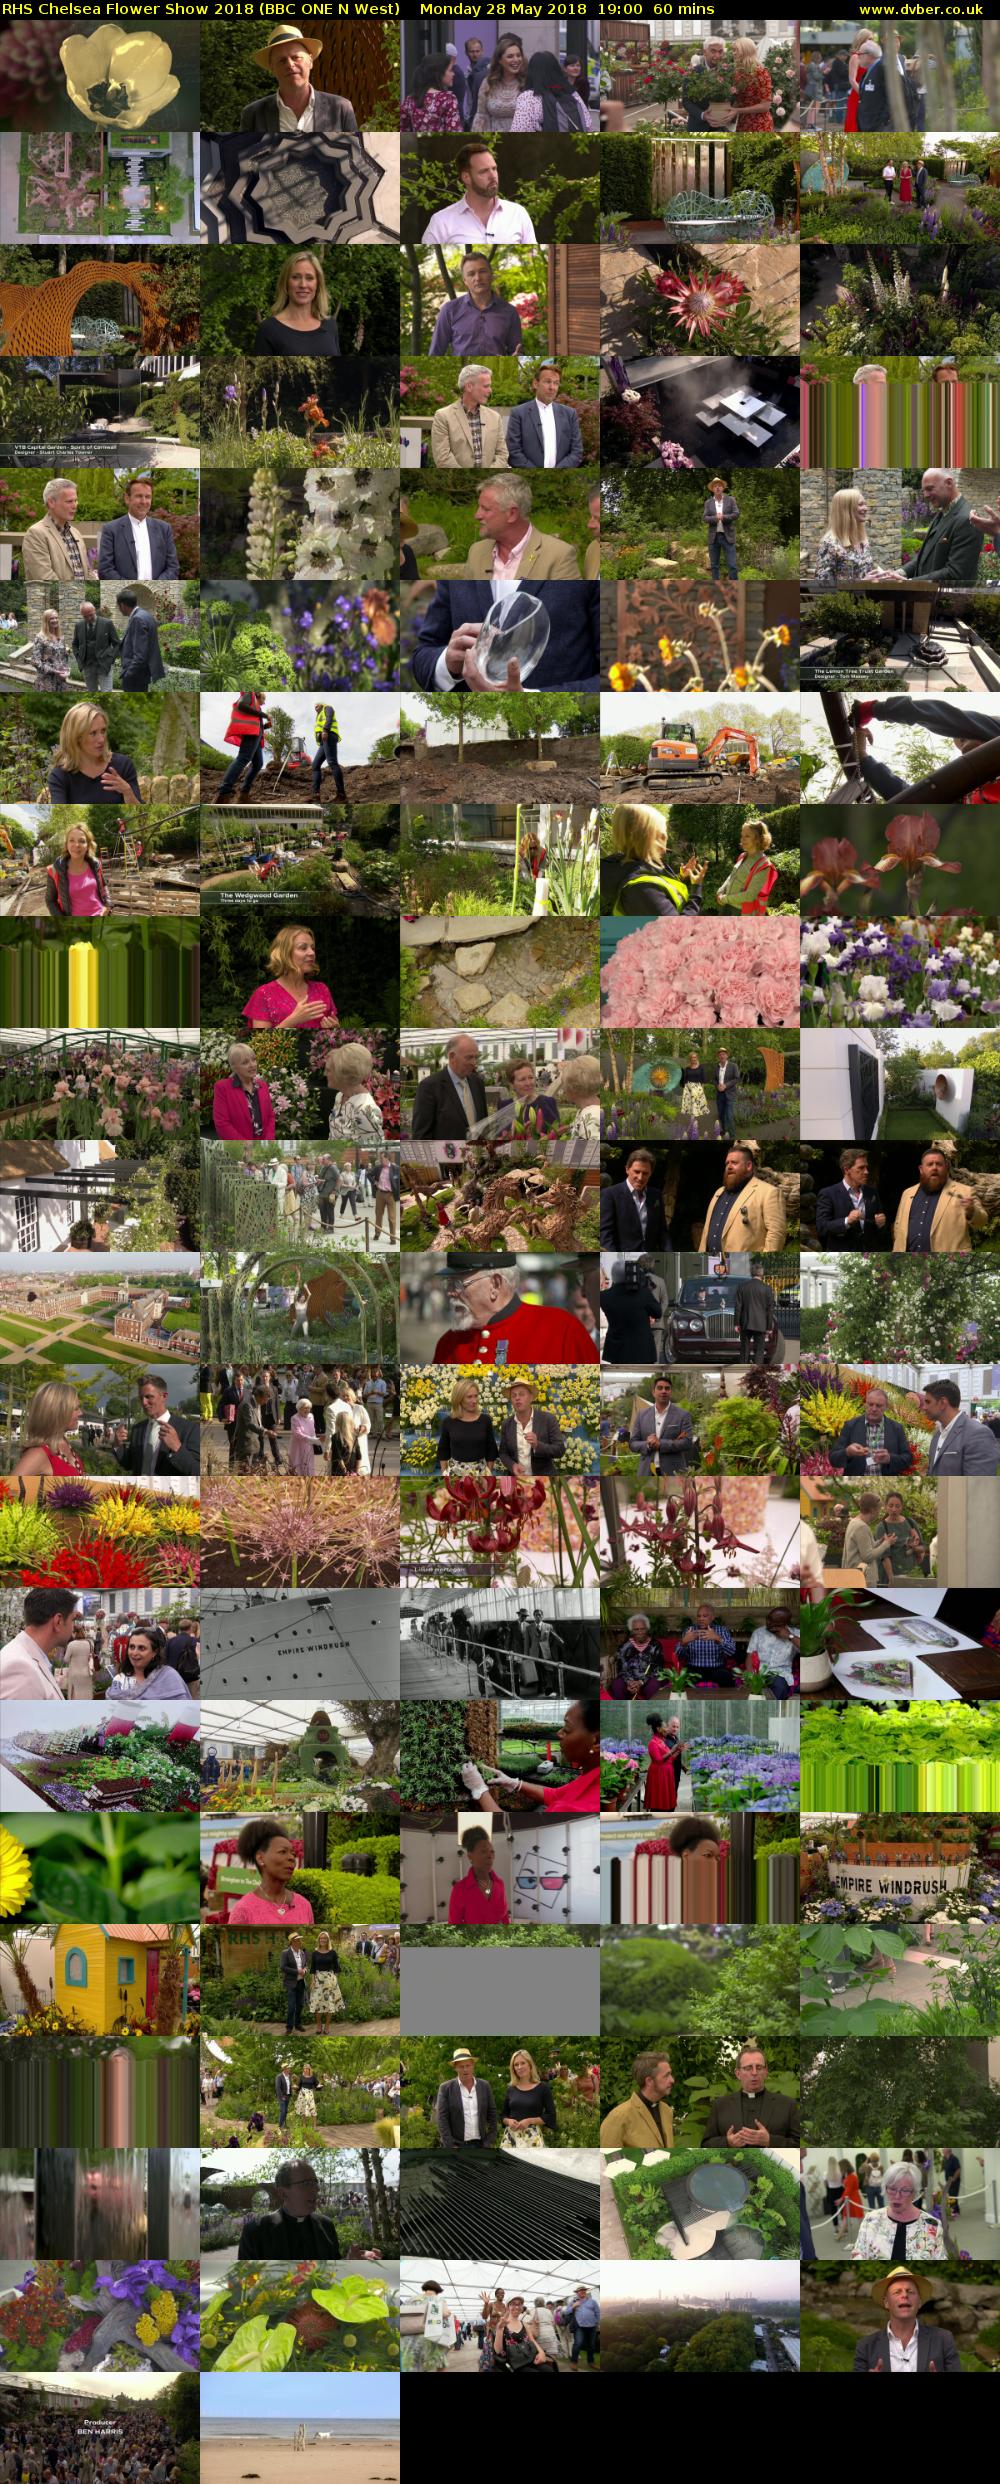 RHS Chelsea Flower Show 2018 (BBC ONE N West) Monday 28 May 2018 19:00 - 20:00